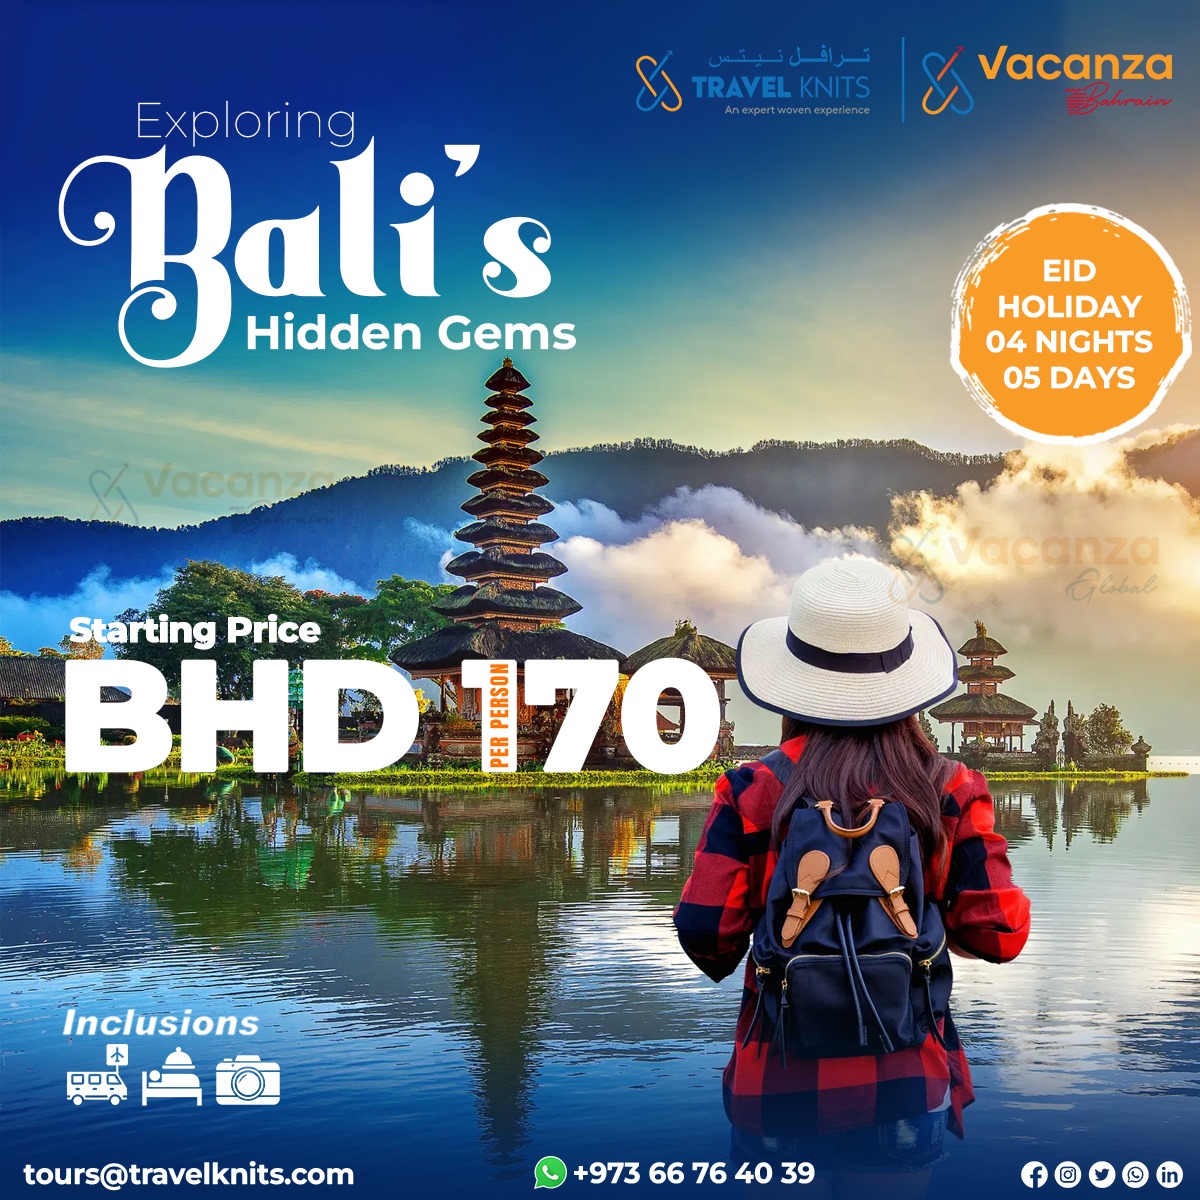 Eid holiday in baliTour Packages - Book honeymoon ,family,adventure tour packages to Eid holiday in bali|Travel Knits